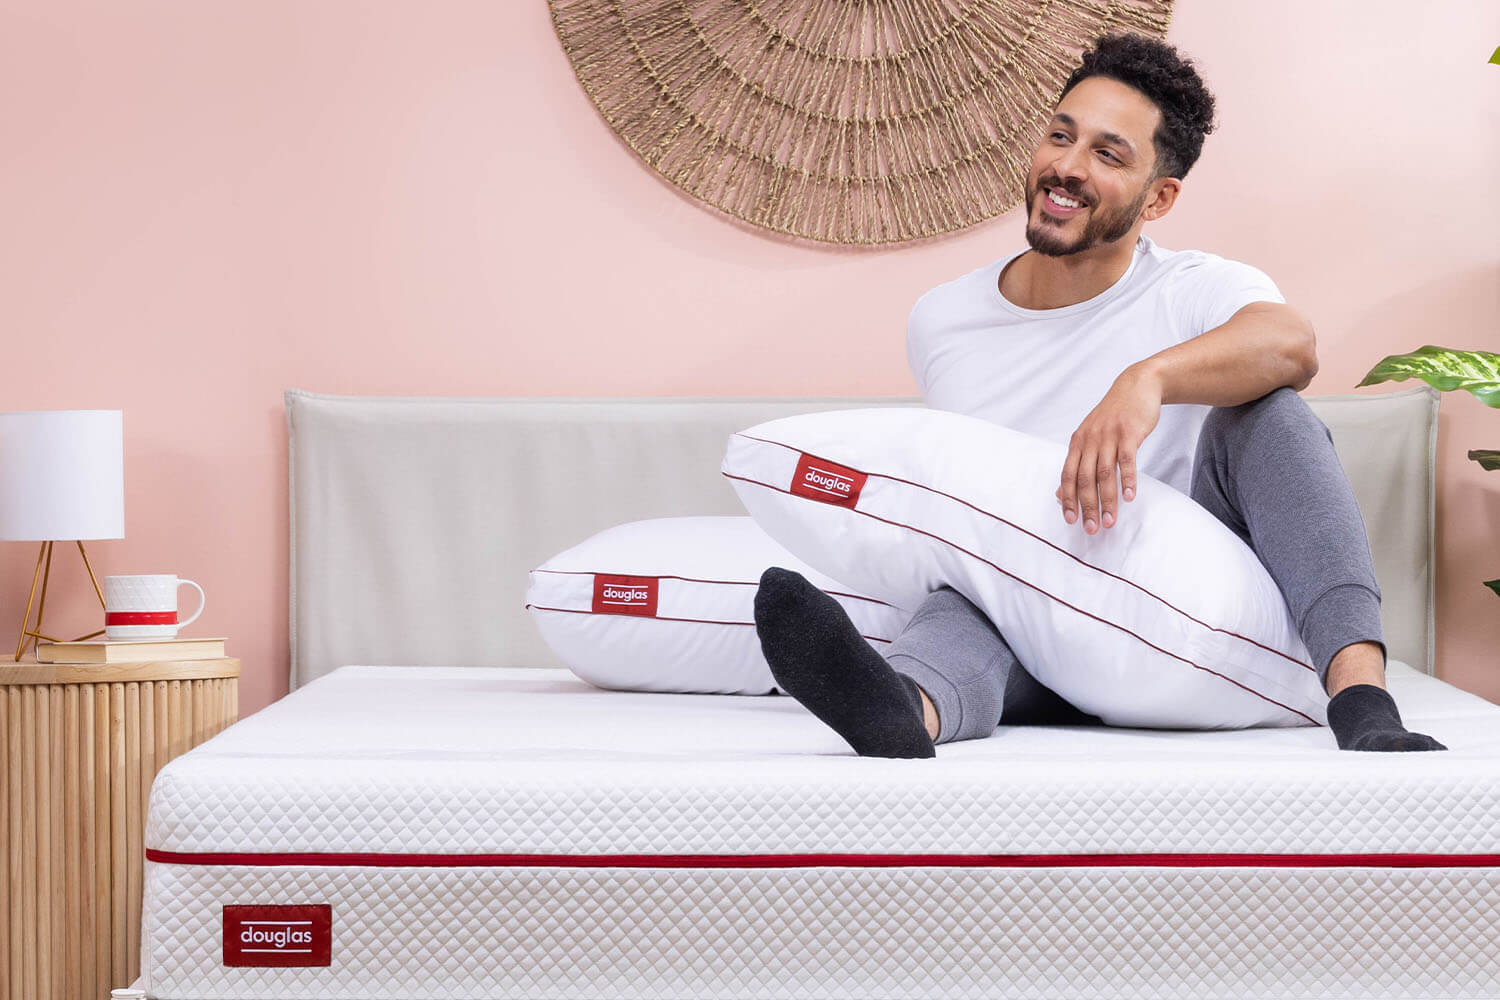 Man sitting on a mattresses with two Douglas Adjustable Memory Foam Pillows